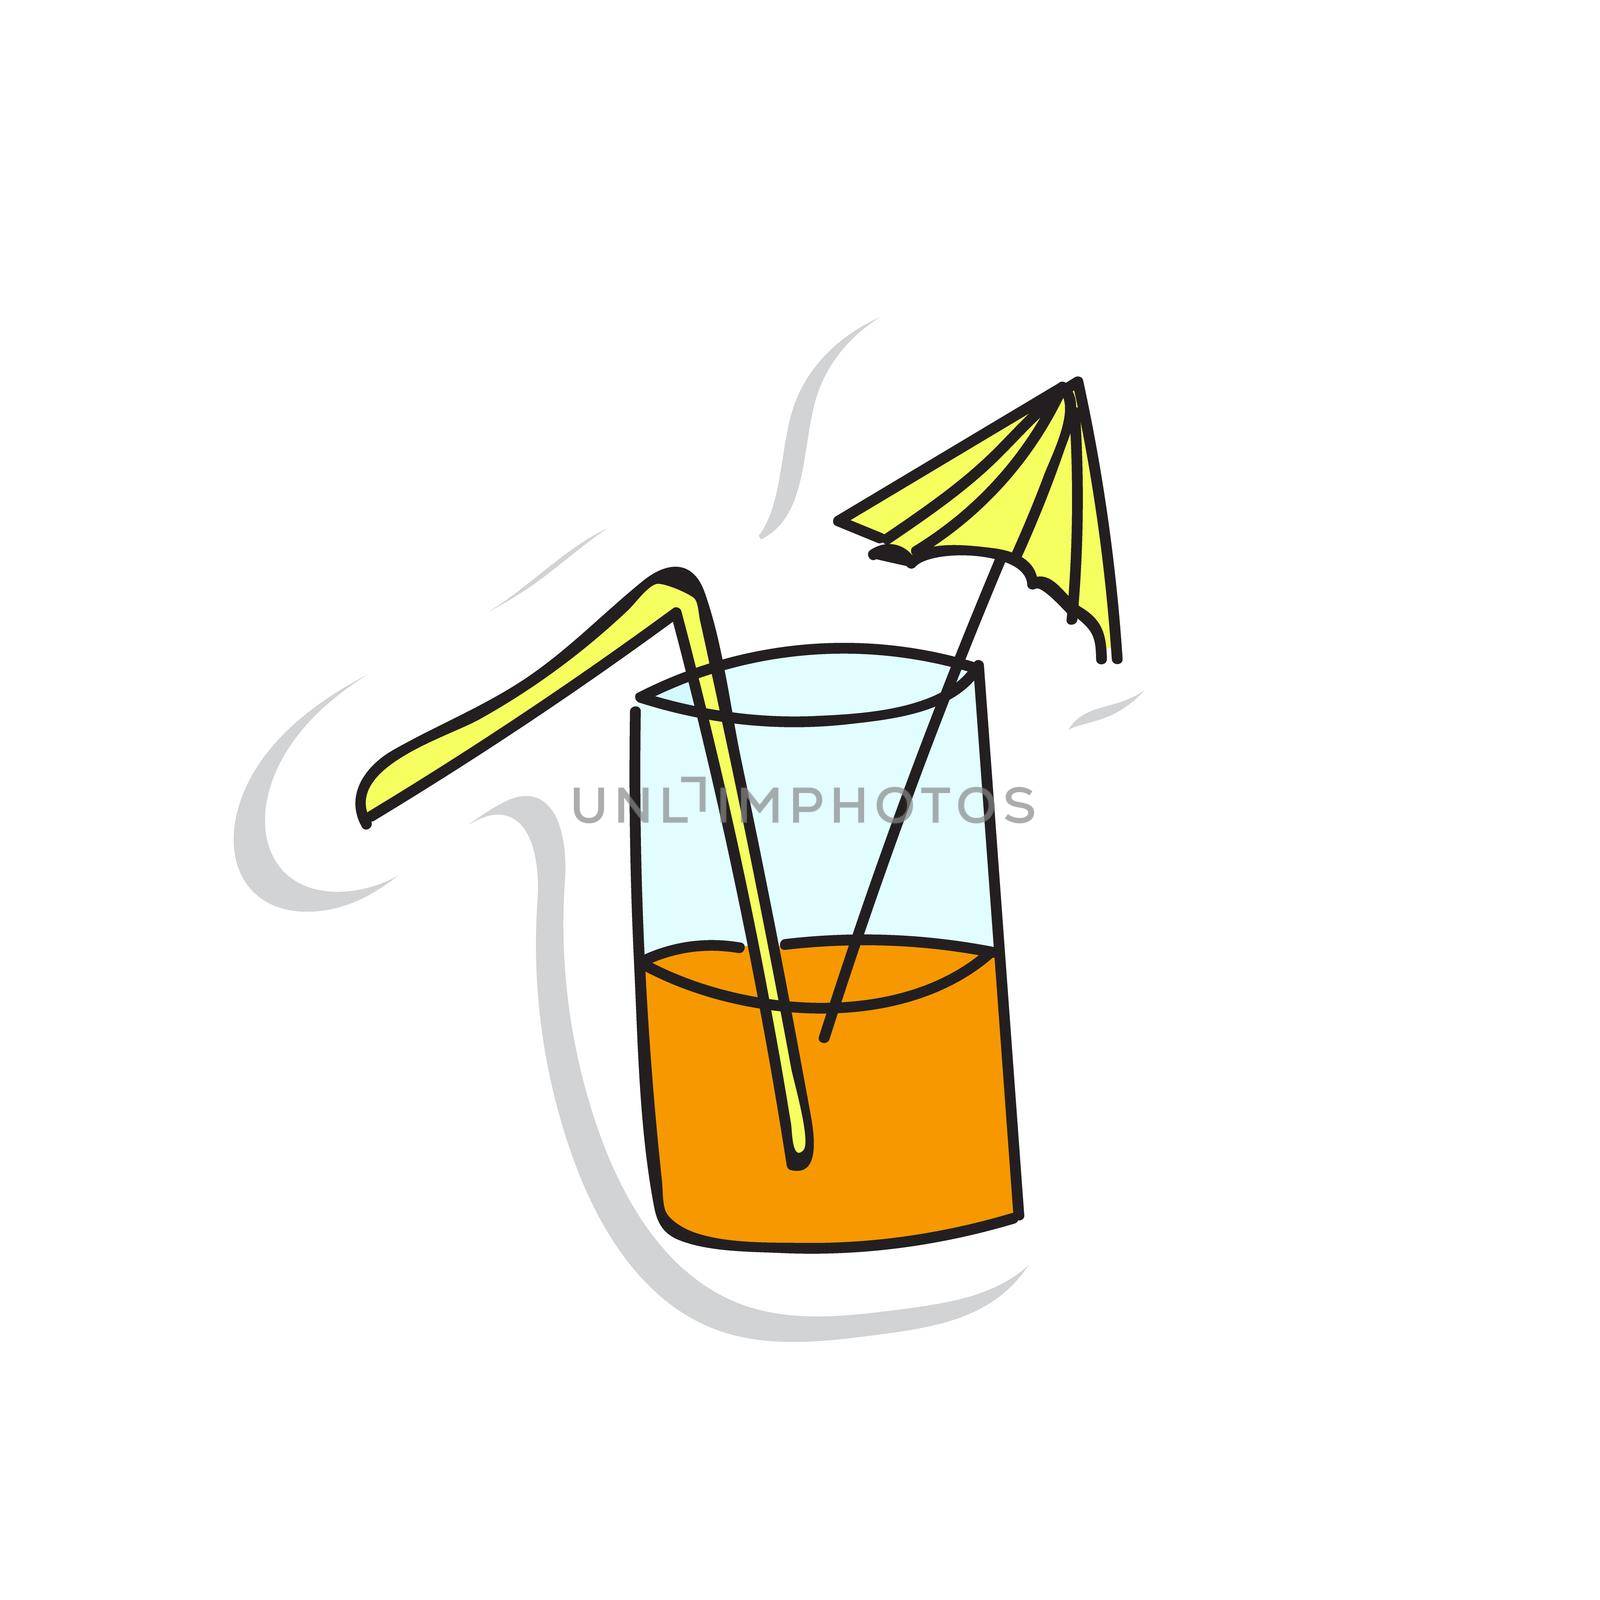 Sticker - Summer cocktail. Juice in glass with an umbrella on white background. Sweet summer drink. For cafe menus and restaurants